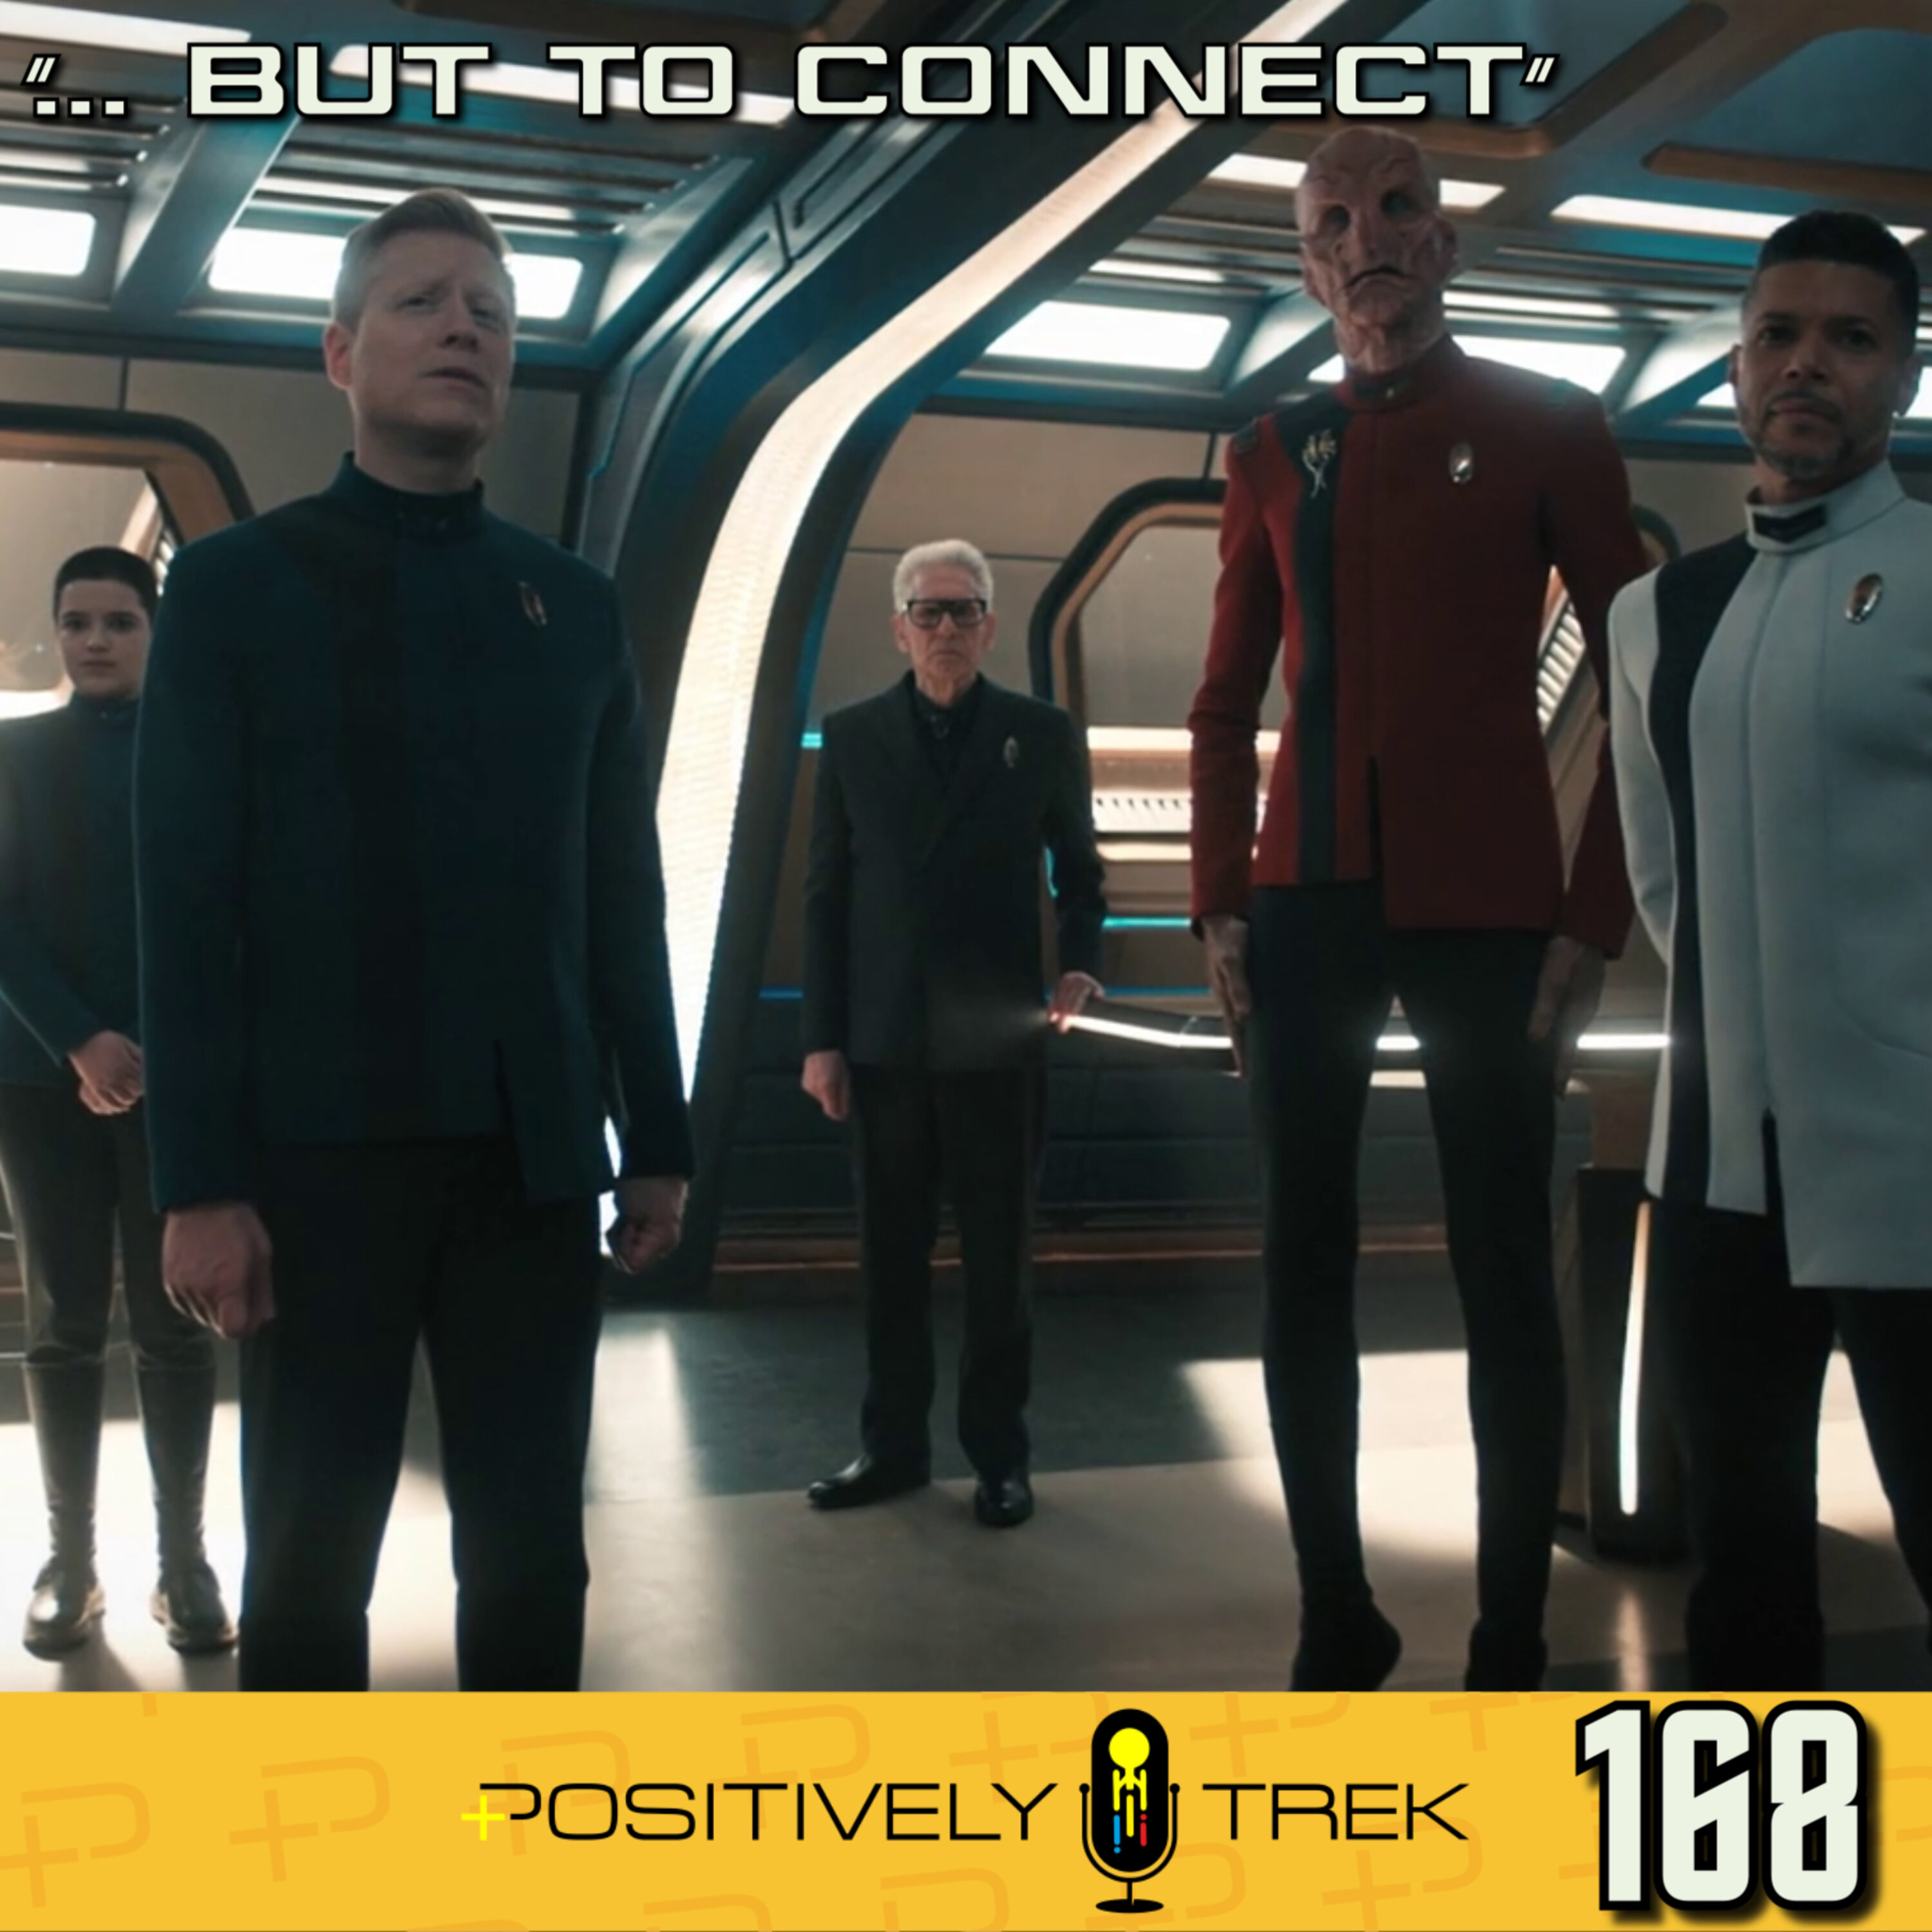 Discovery Review: “... But to Connect” (4.07) Image